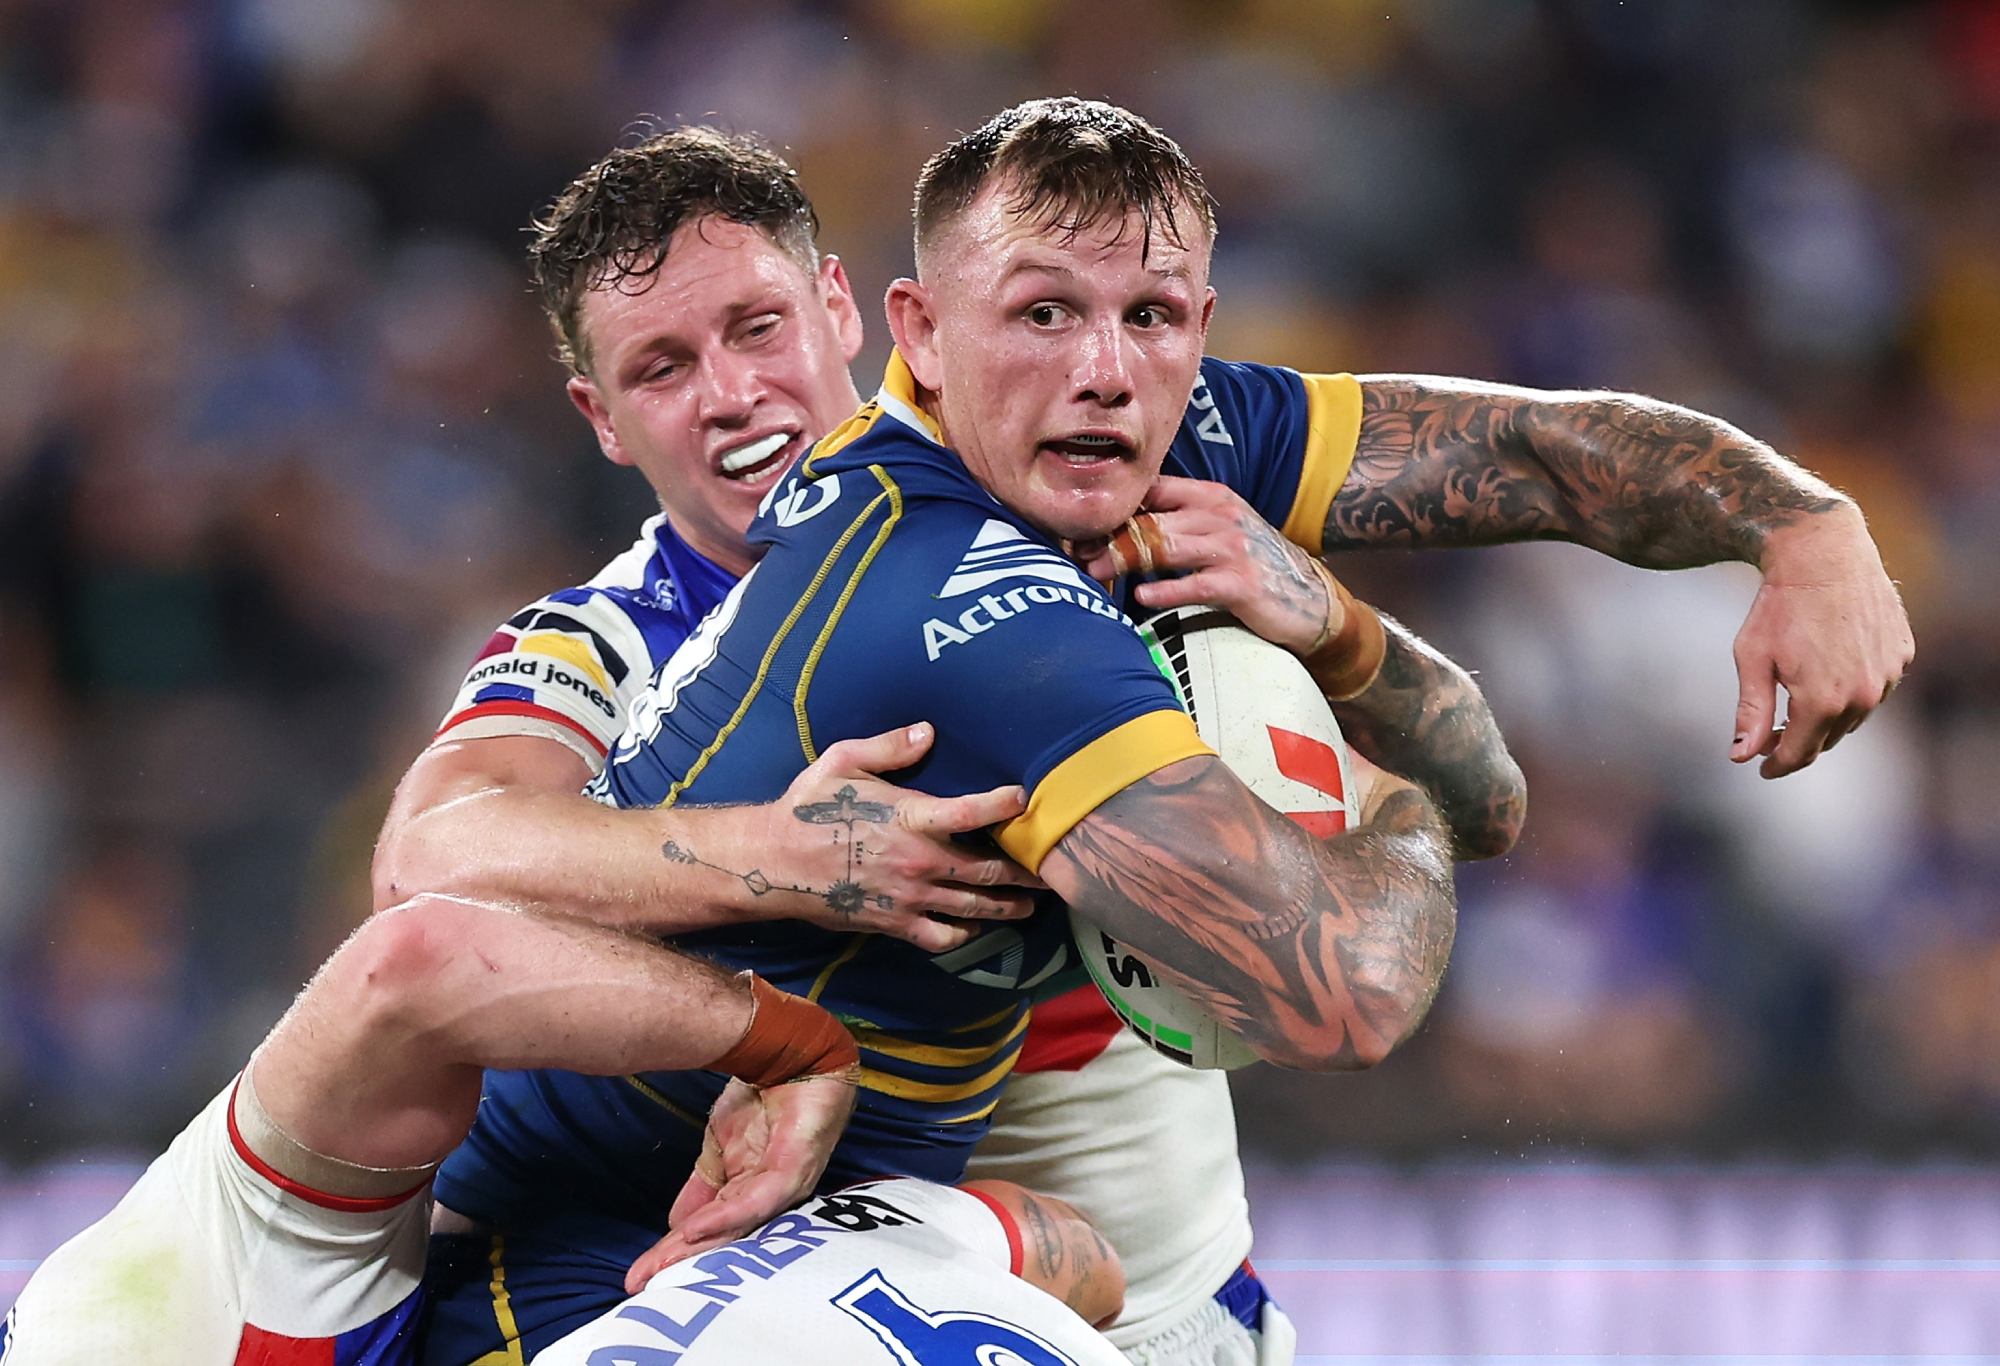 SYDNEY, AUSTRALIA - APRIL 28: J'maine Hopgood of the Eels looks to pass as he is tackled during the round nine NRL match between Parramatta Eels and Newcastle Knights at CommBank Stadium on April 28, 2023 in Sydney, Australia. (Photo by Mark Kolbe/Getty Images)